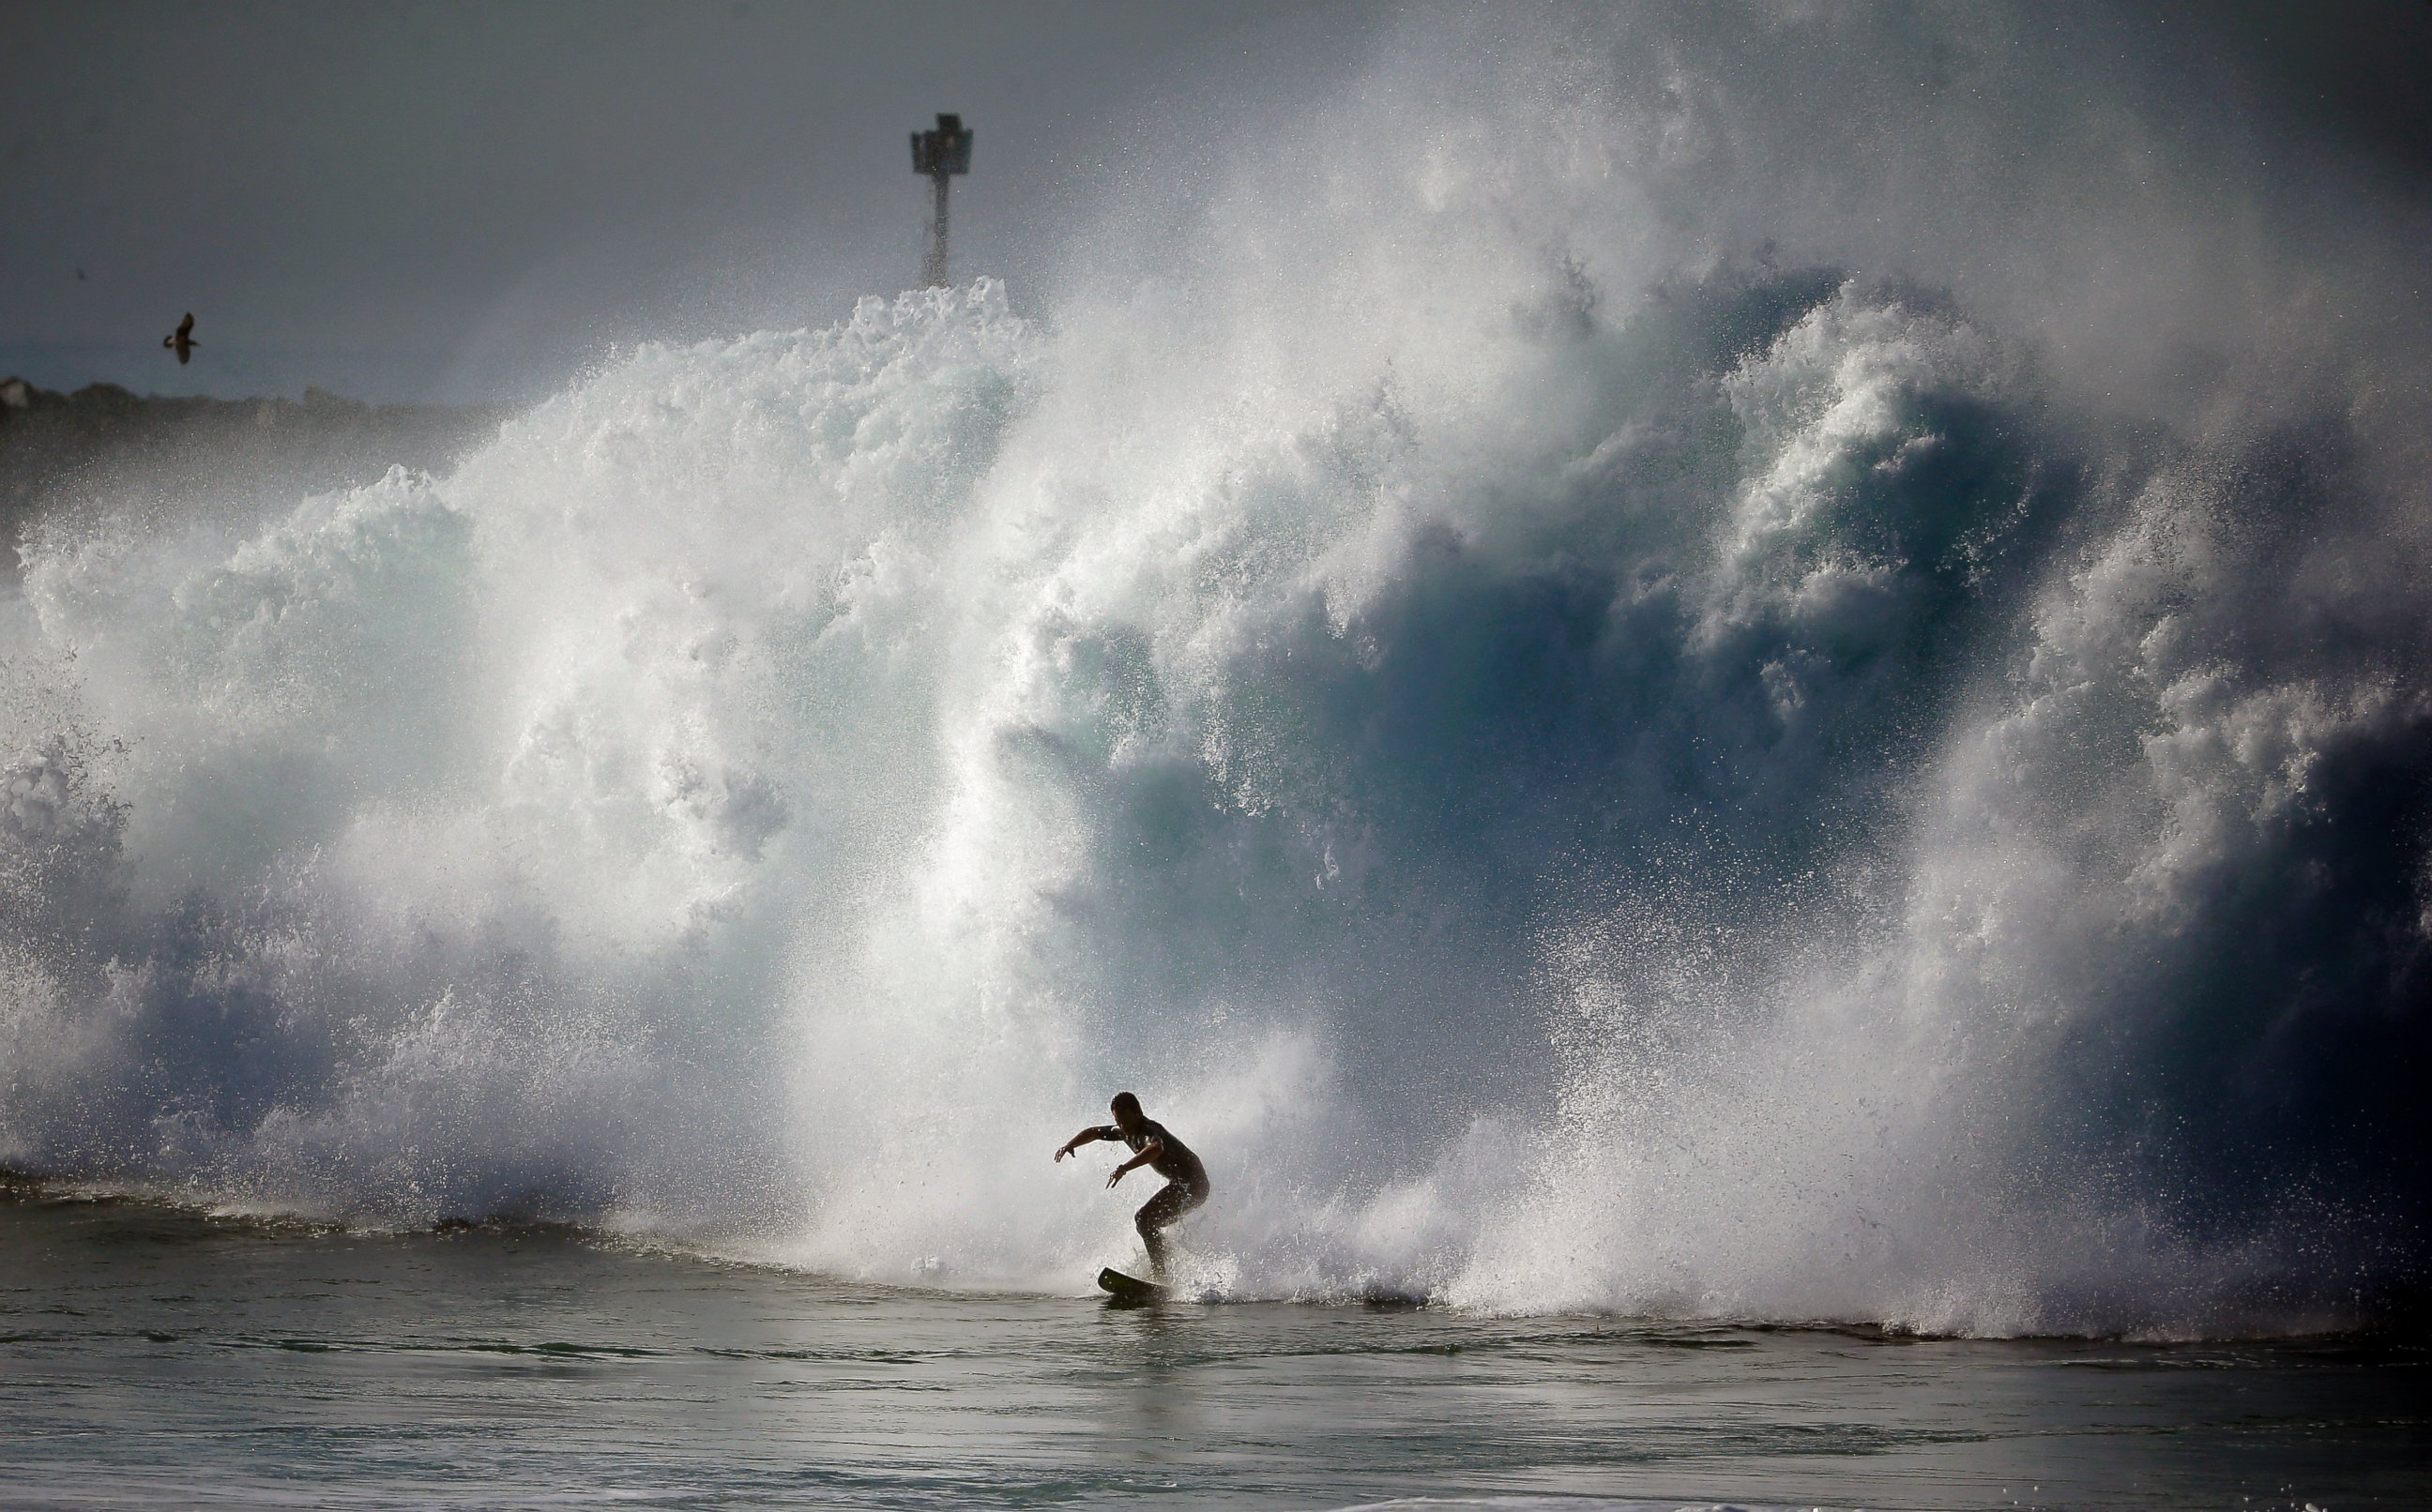 PHOTO: A surfer rides a wave at the wedge in Newport Beach, Calif., Aug. 27, 2014.